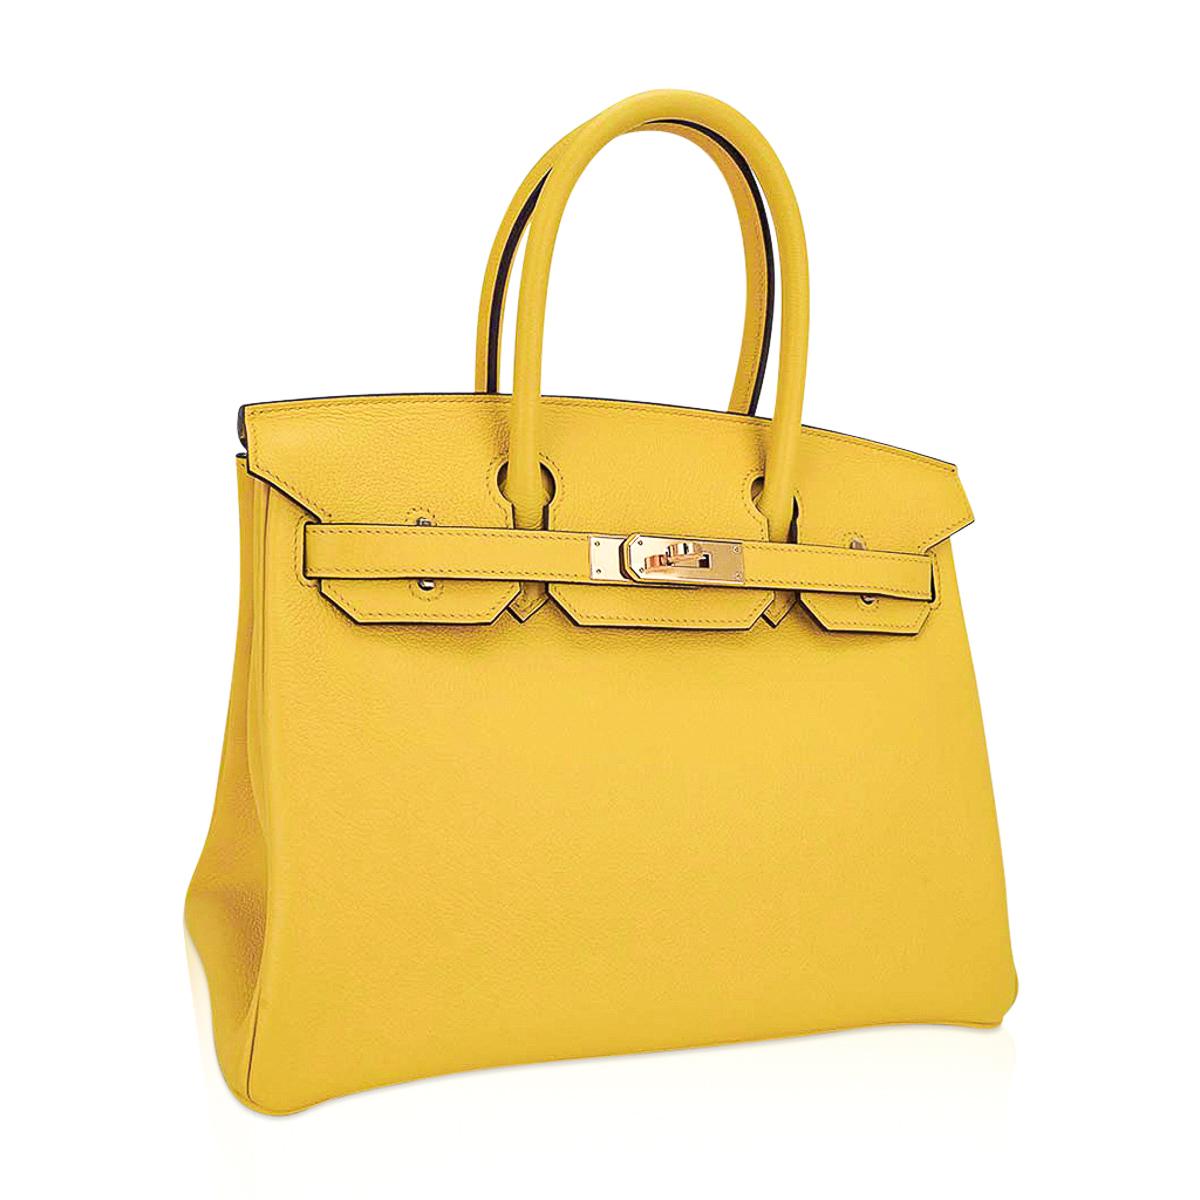 Mightychic offers an Hermes Birkin 30 bag featured in sunny Jaune de Naples.
This sought after Hermes Birkin bag is exquisite in Novillo leather.
Accentuated with lush gold hardware.
Comes with the lock and keys in the clochette, sleepers, raincoat